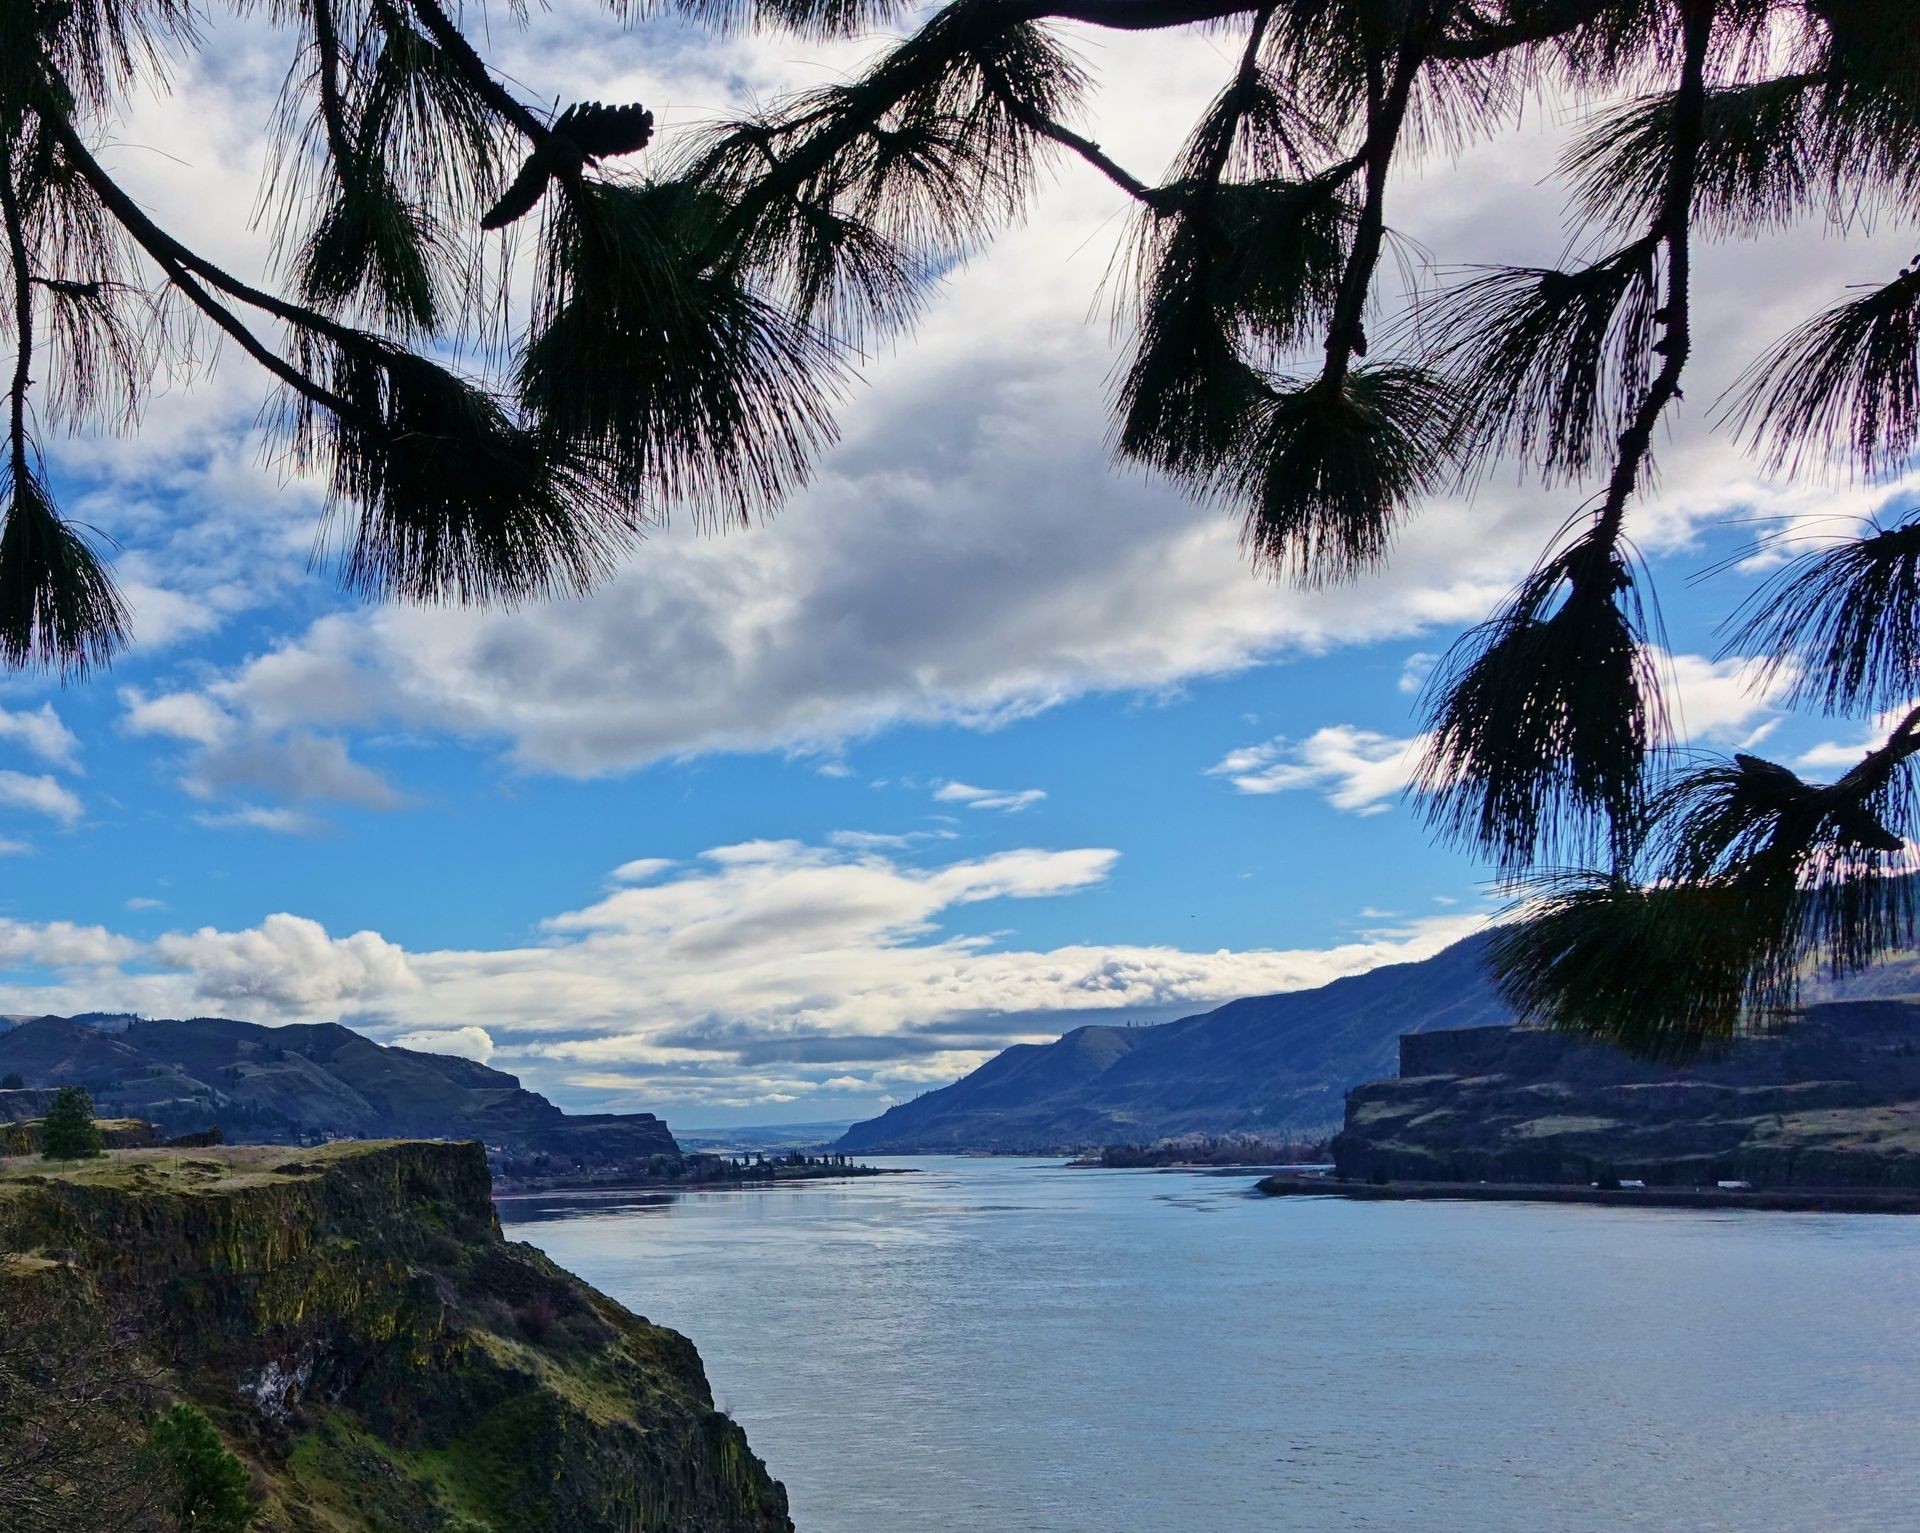 Beautiful view of the Columbia River Gorge with overhanging tree branches at top of frame and a blue sky with white clouds. Picture taken on Washington state side of the Columbia River looking east.